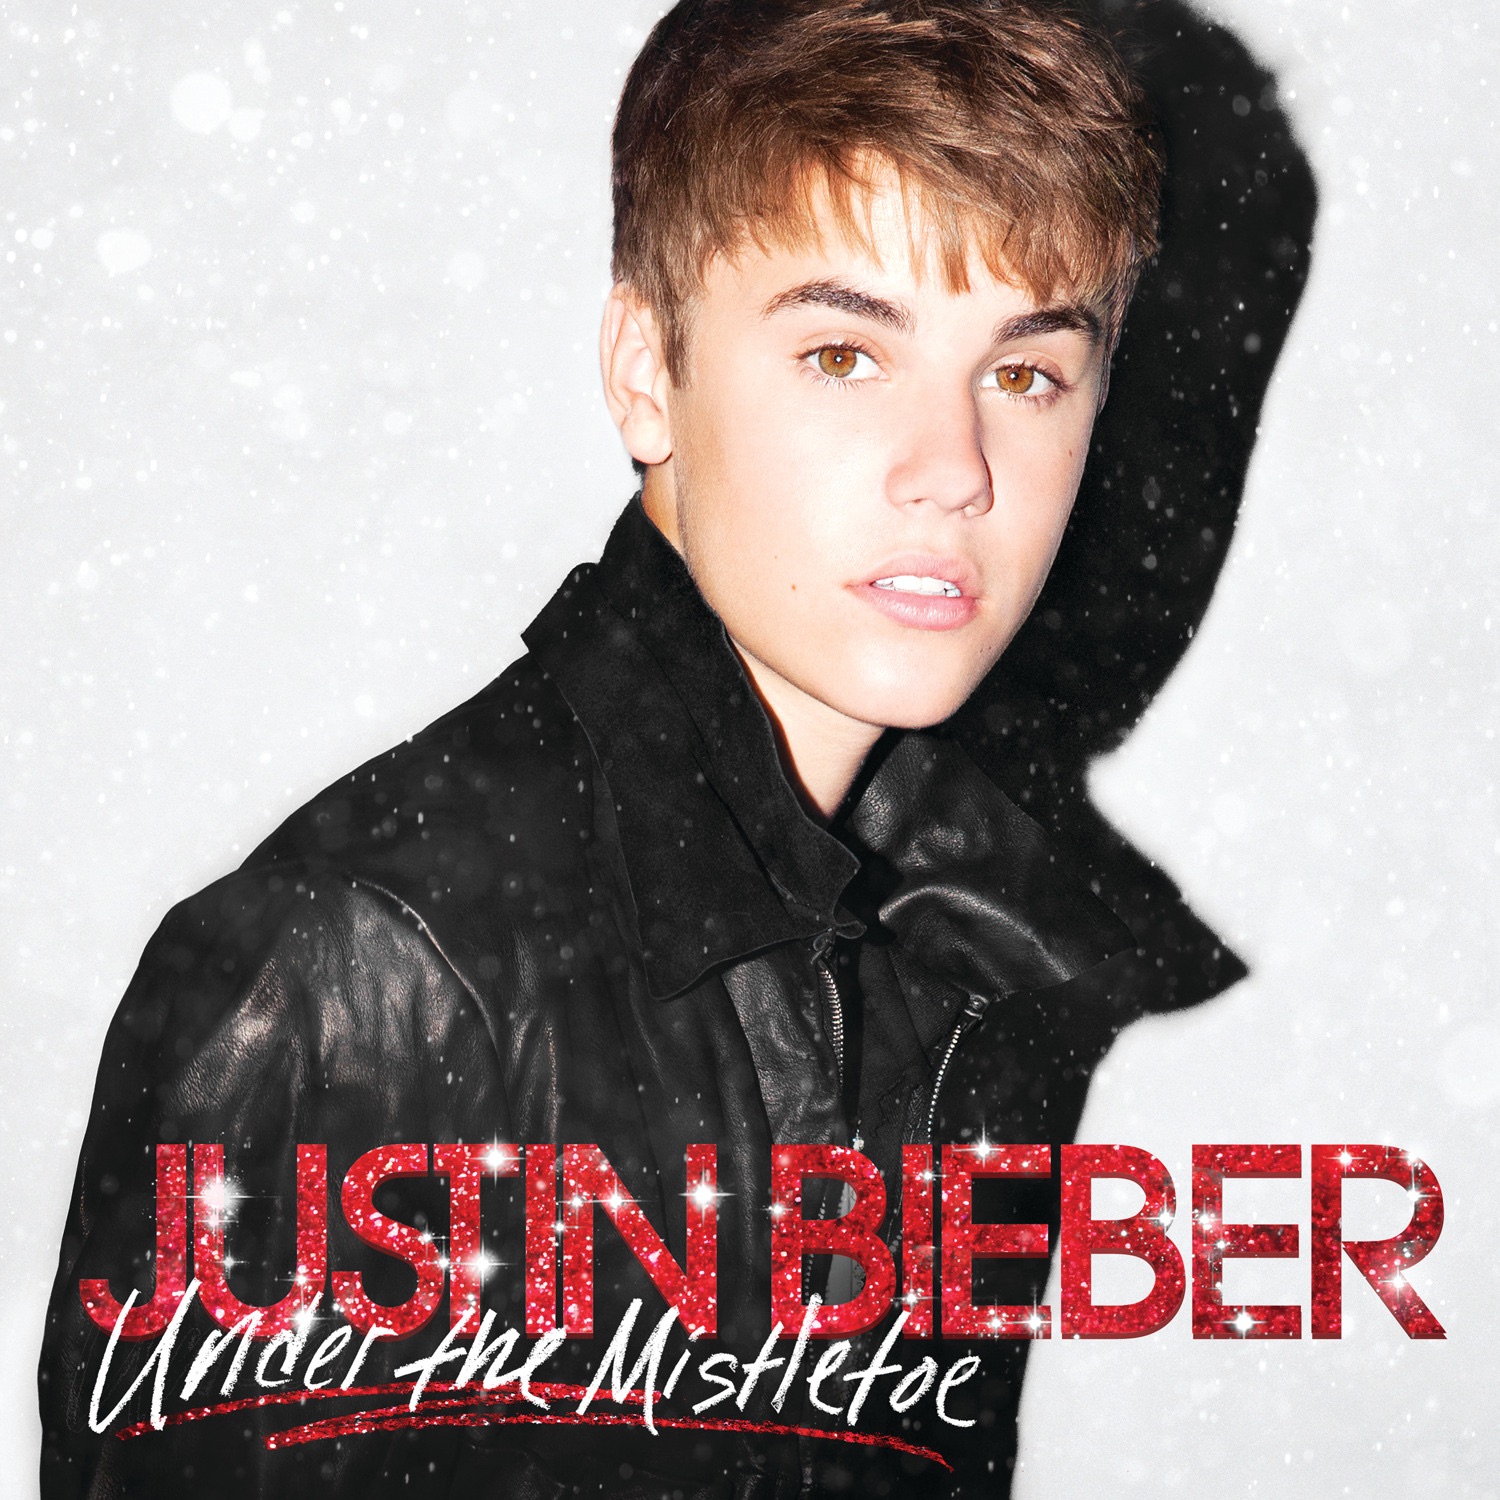 Justin Bieber featuring USHER — Christmas Song (Chestnuts Roasting On An Open Fire) cover artwork